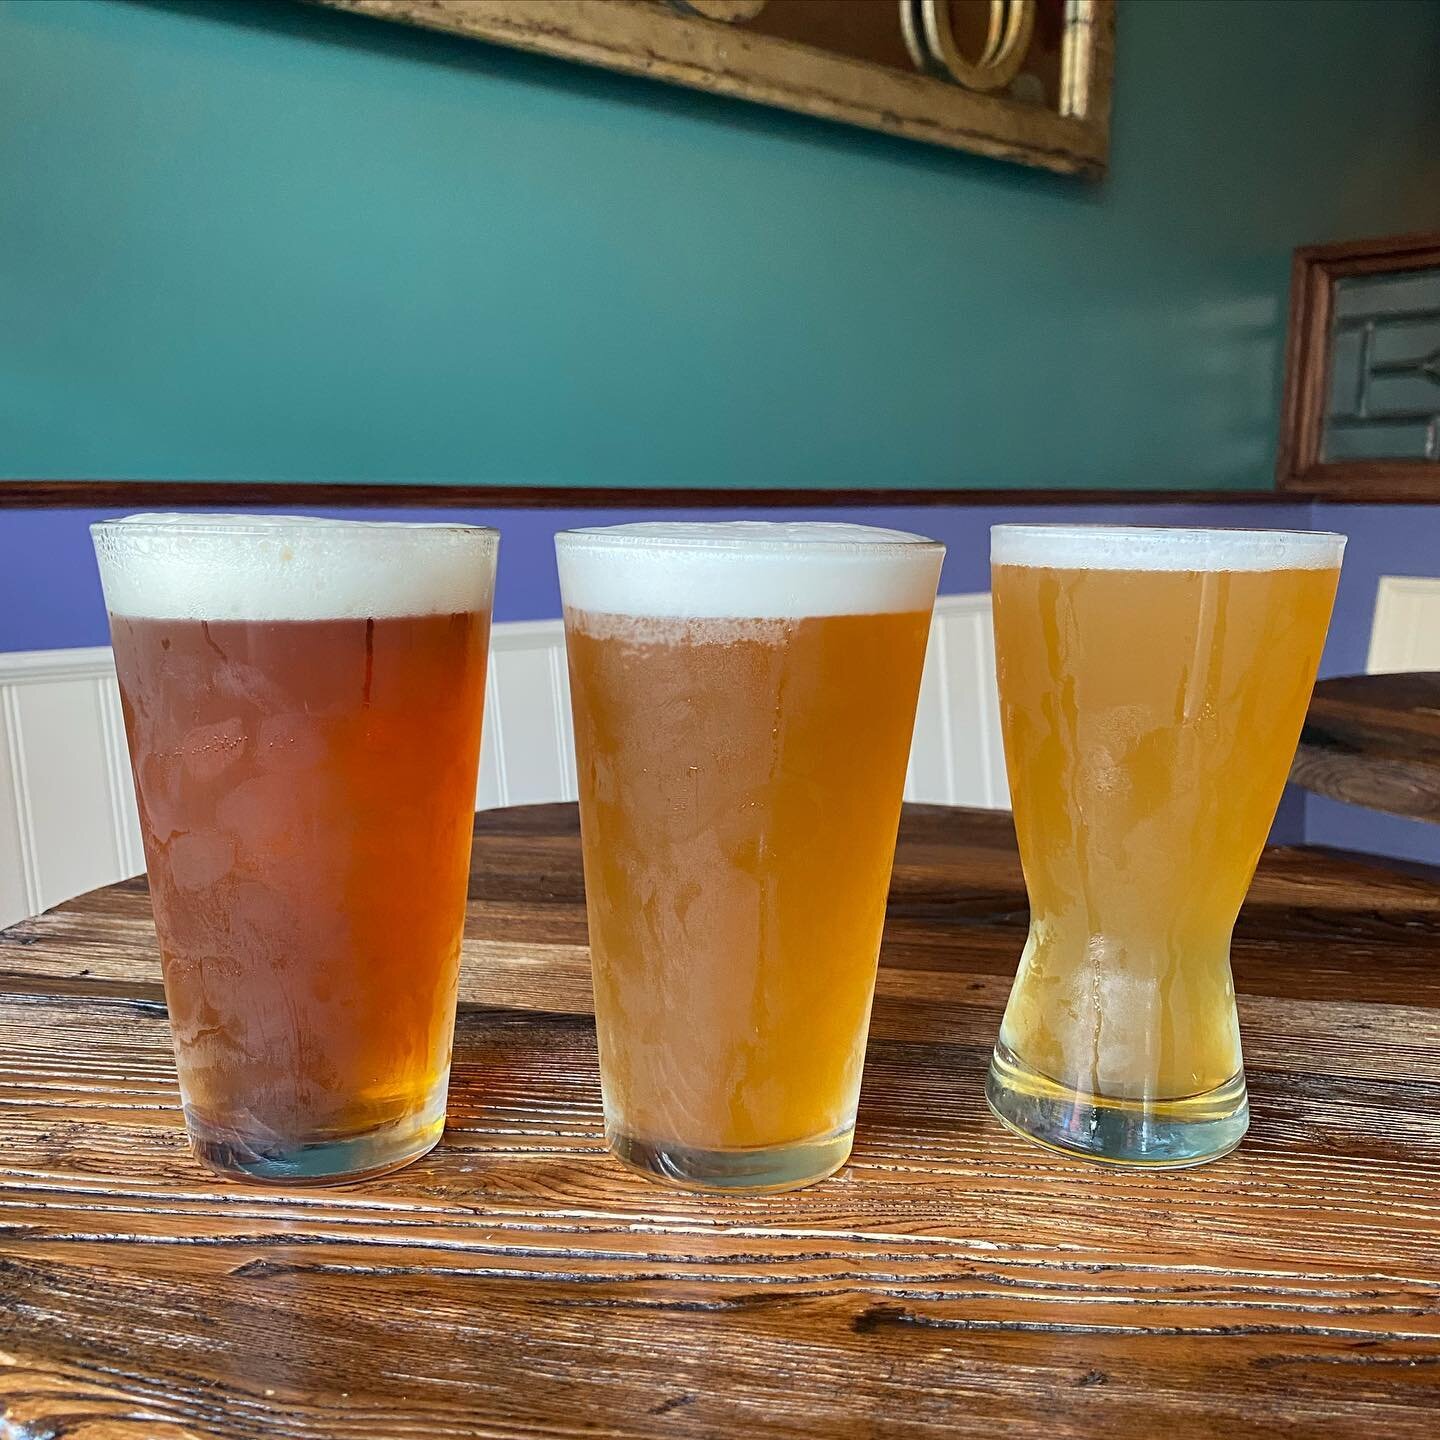 Fall draft beers have arrived 🍂 

* @bluepointbrewing - Mother Pumpkin Ale

* @18thwardbrewing - Oktoberfest

* @hudsonnorthcider - Toasted Pumpkin Cider 

All three are $6 during happy hour!

Happy Hour everyday until 7pm. EVERYTHING is $2 OFF

.
.